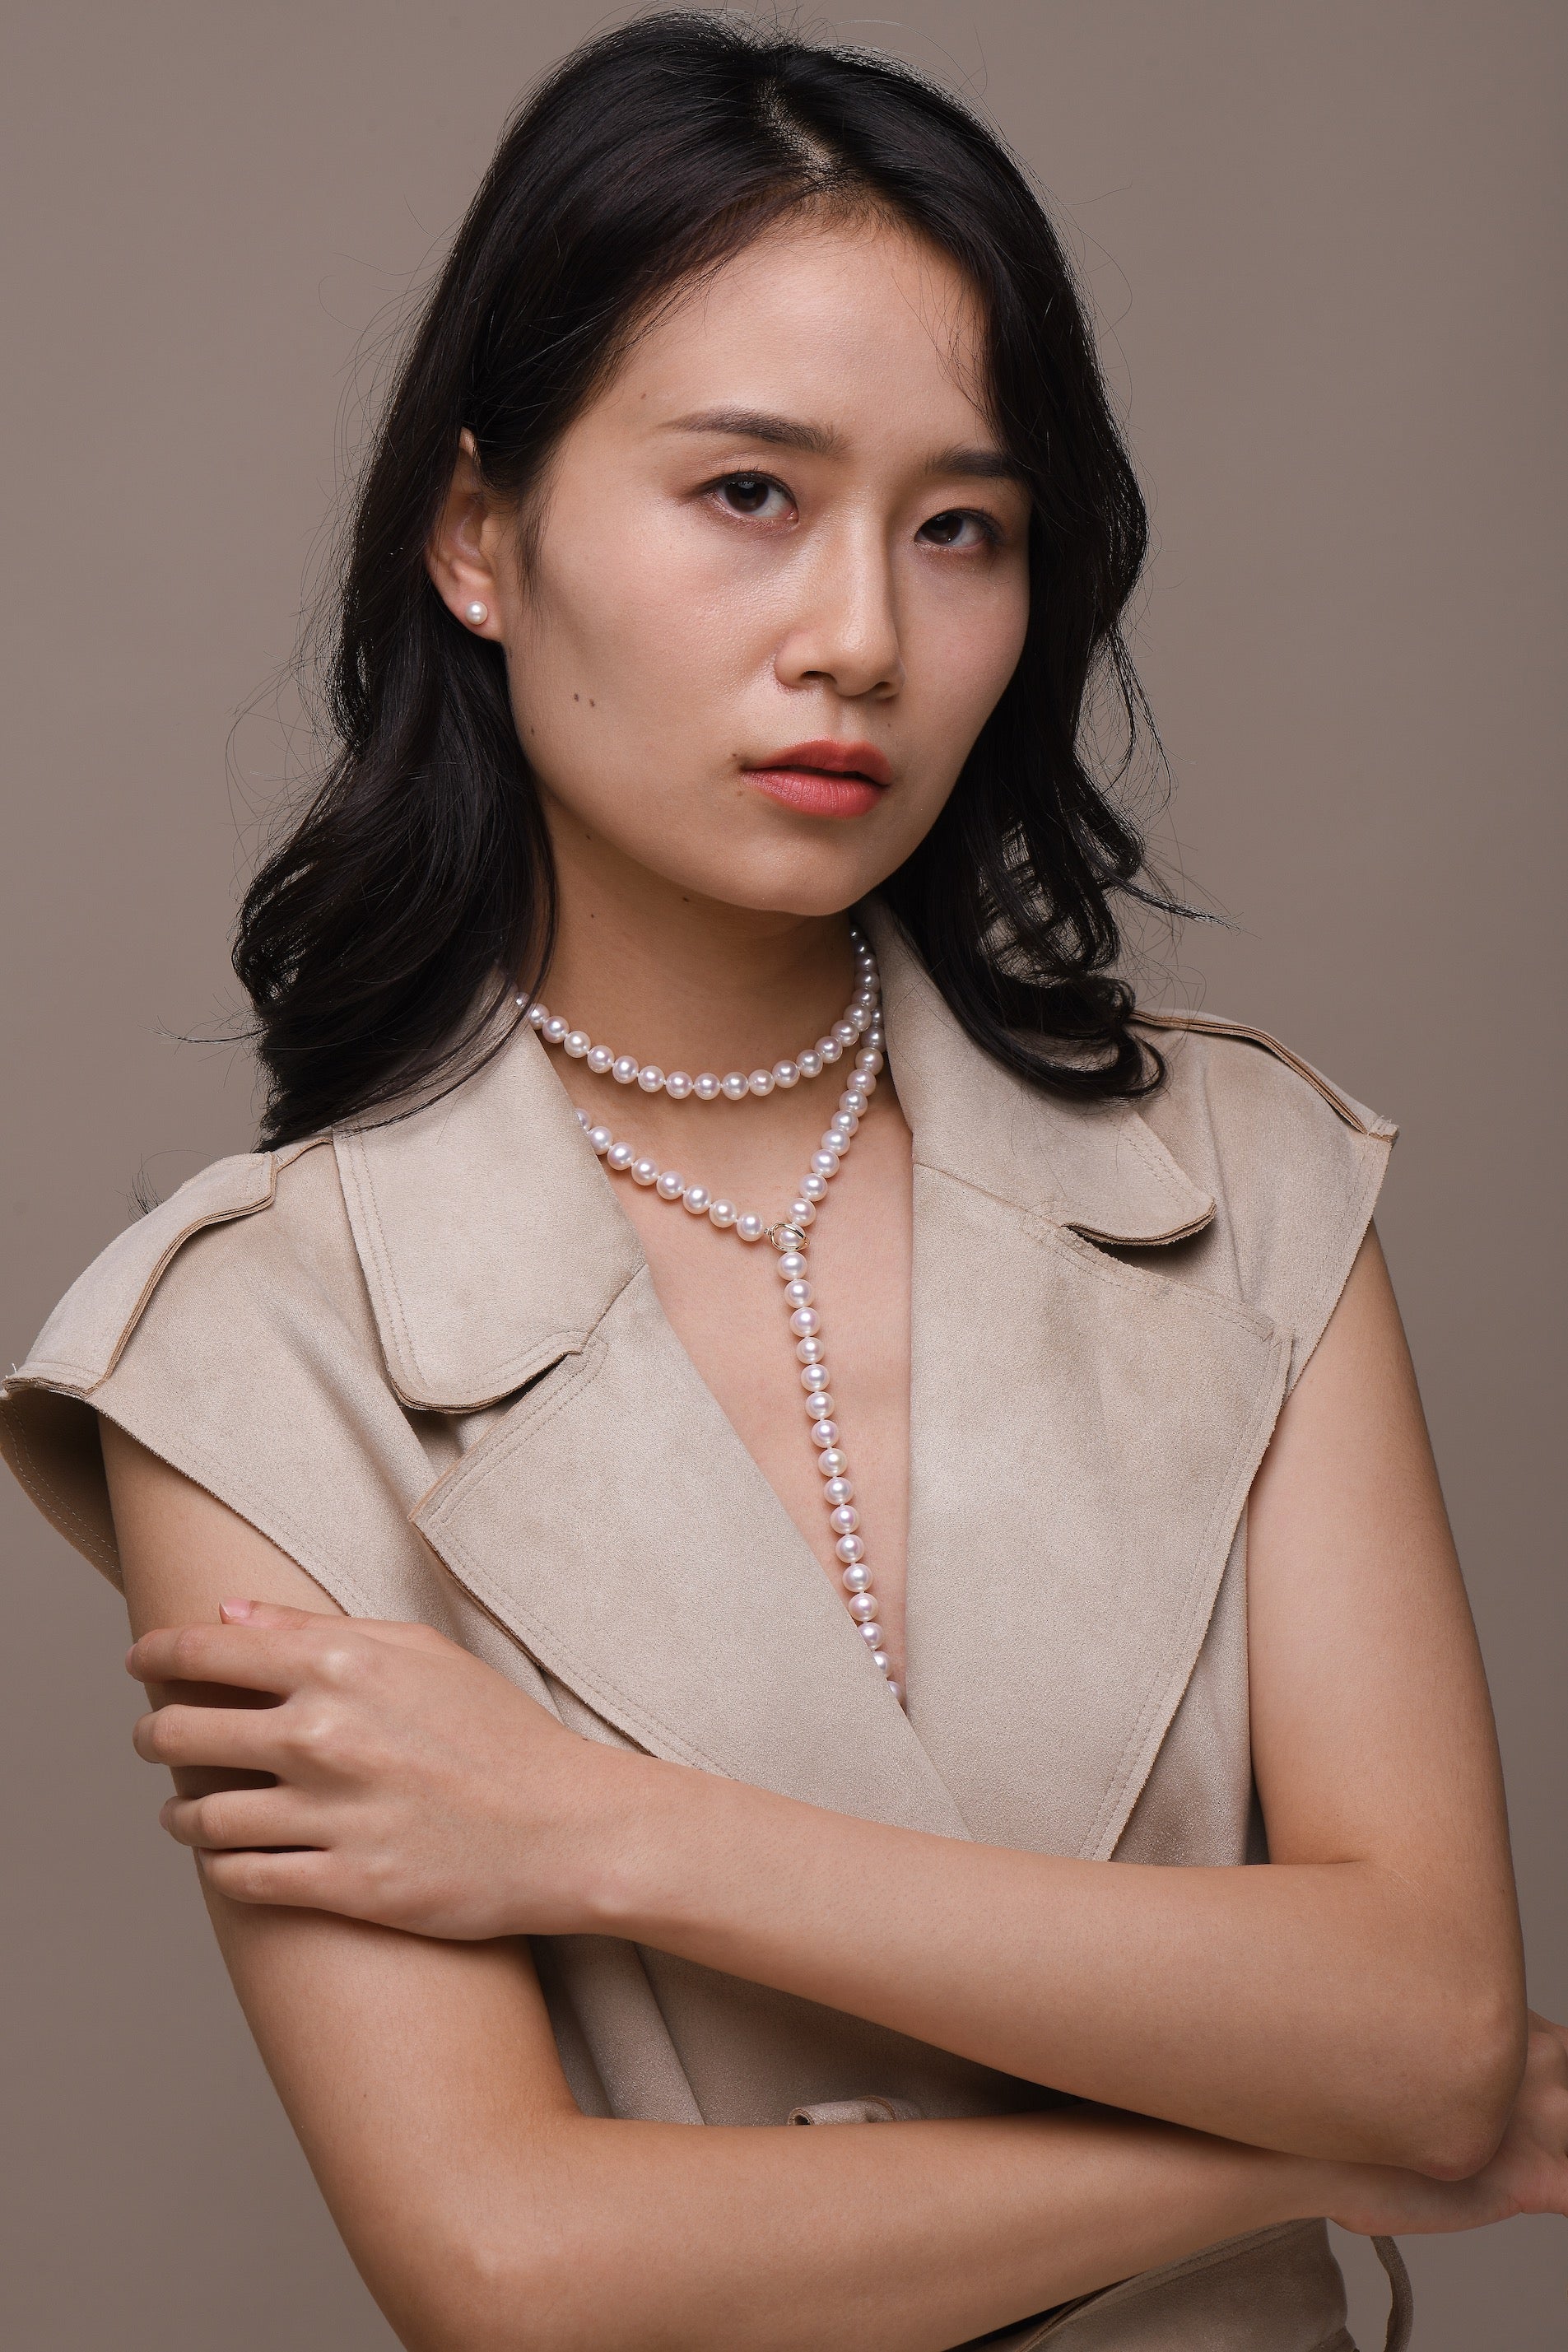 Model wearing pearl earrings and necklace